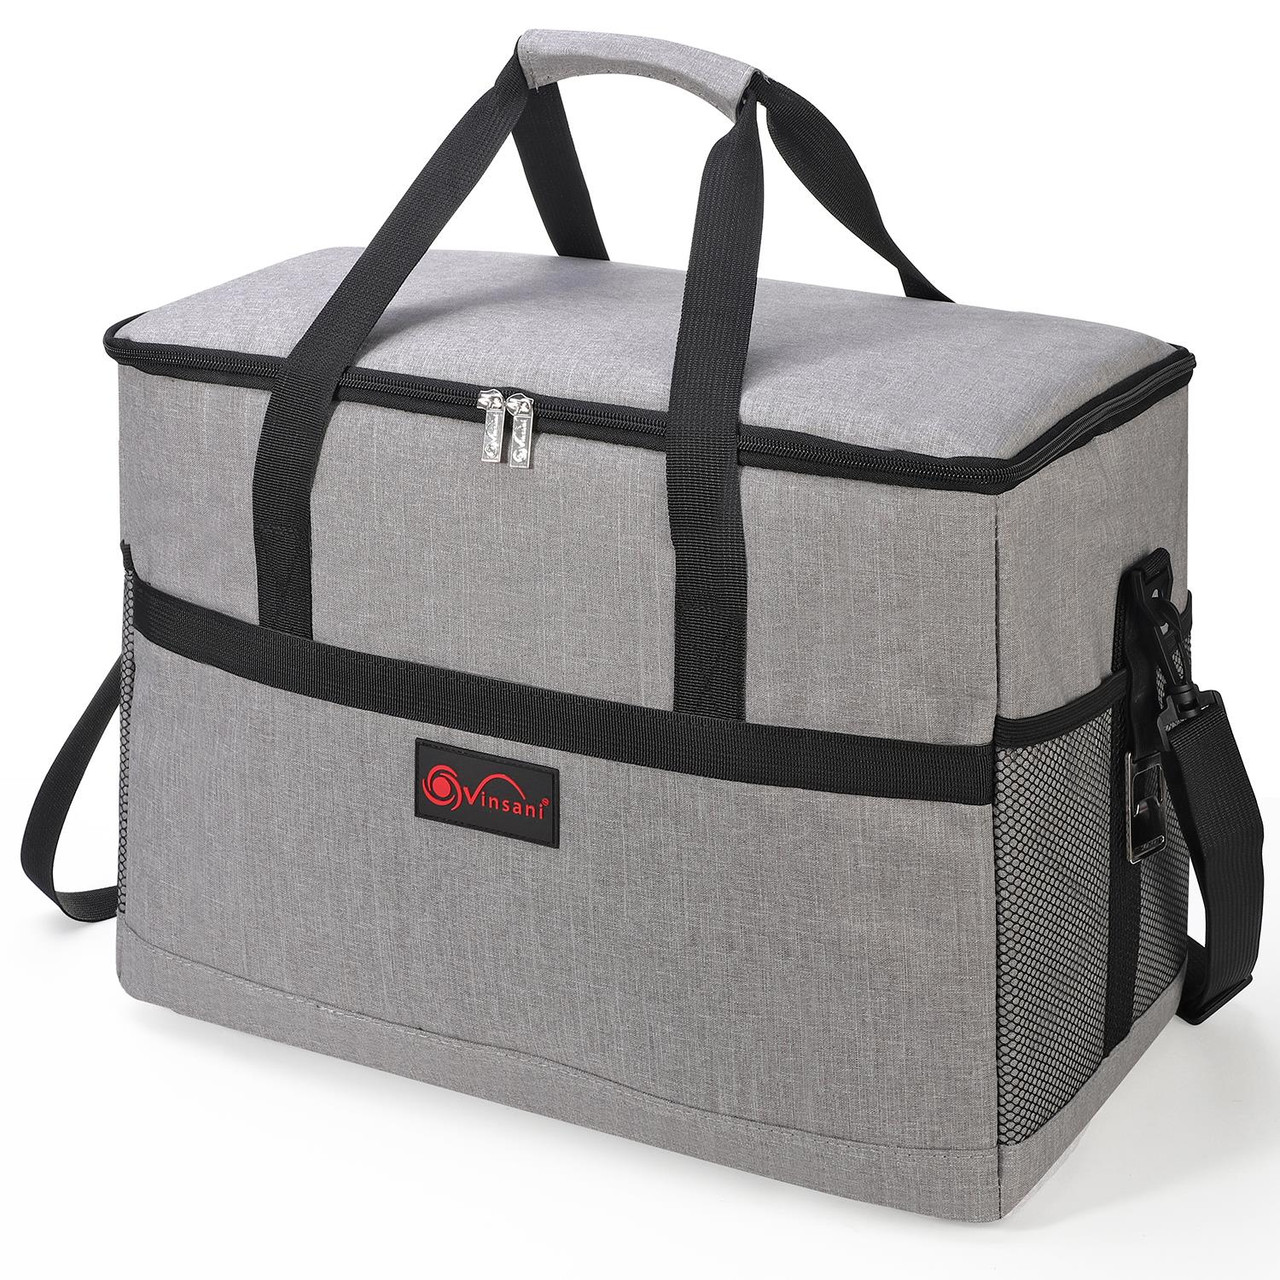 Family Outdoor Activities BBQ Lifewit 30L Large Cooler Bag Soft Insulated Picnic Family Cool Bag with Hard Liner Grey Cool Box Soft-Sided Cooling Bag for Camping 